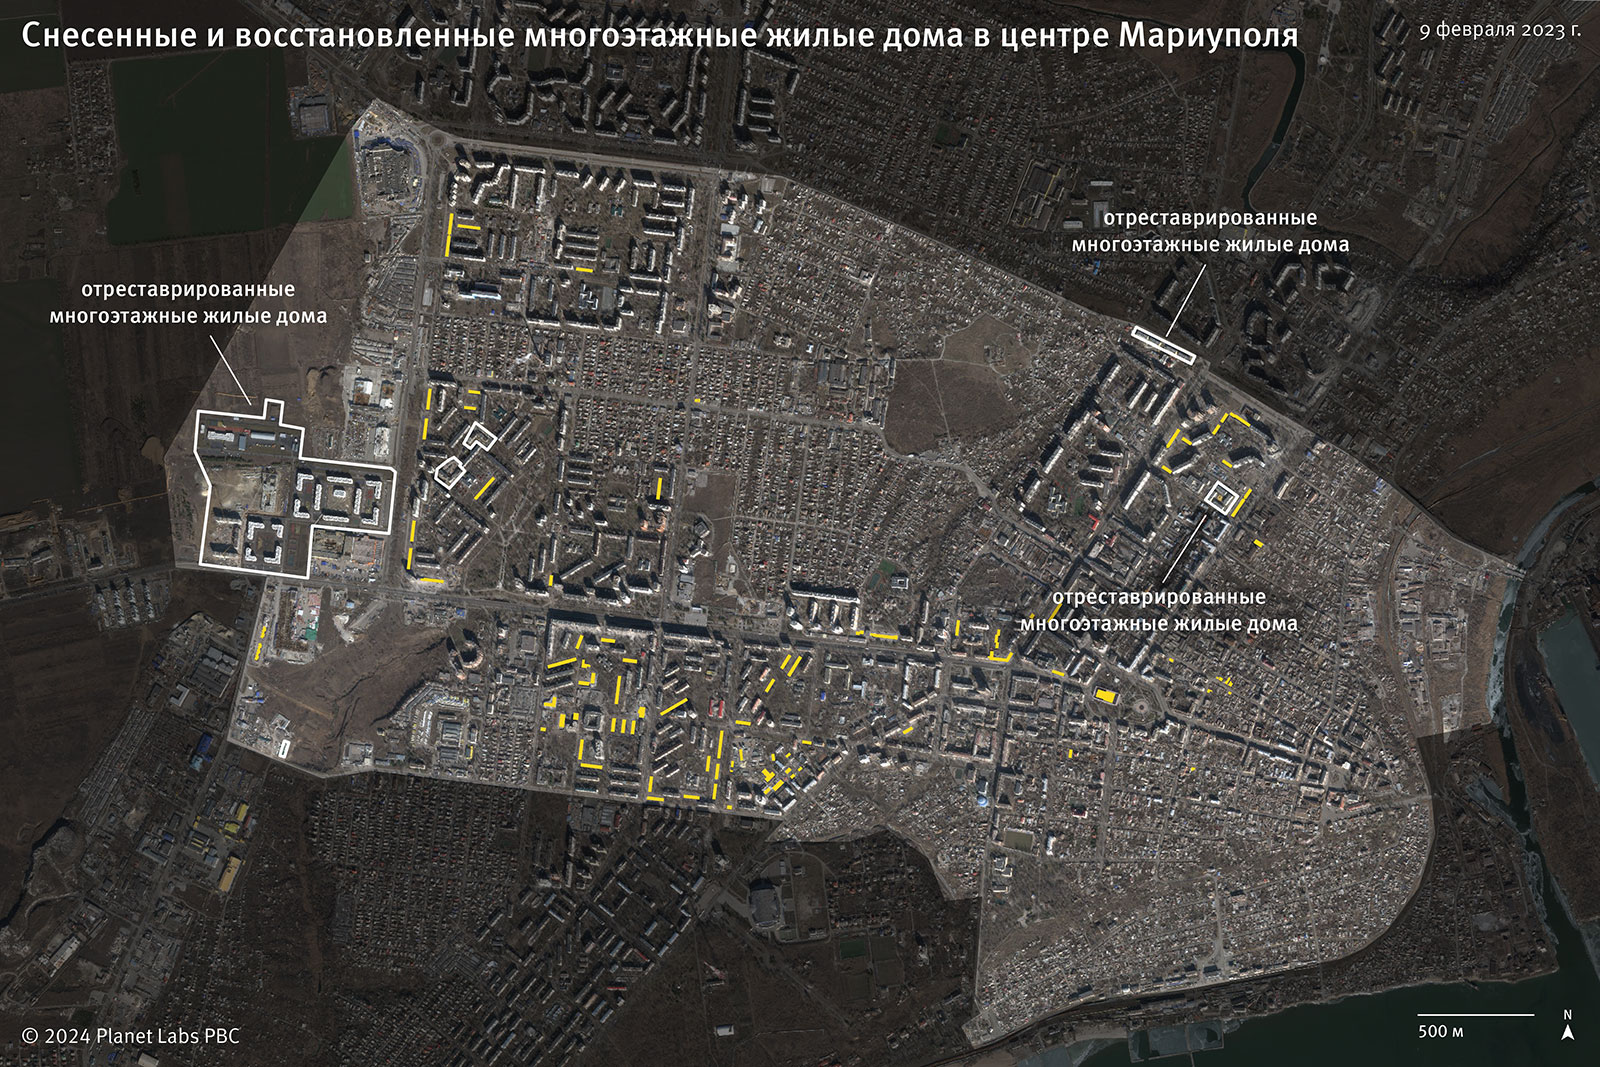 Demolished high-rise apartment buildings in Central Mariupol